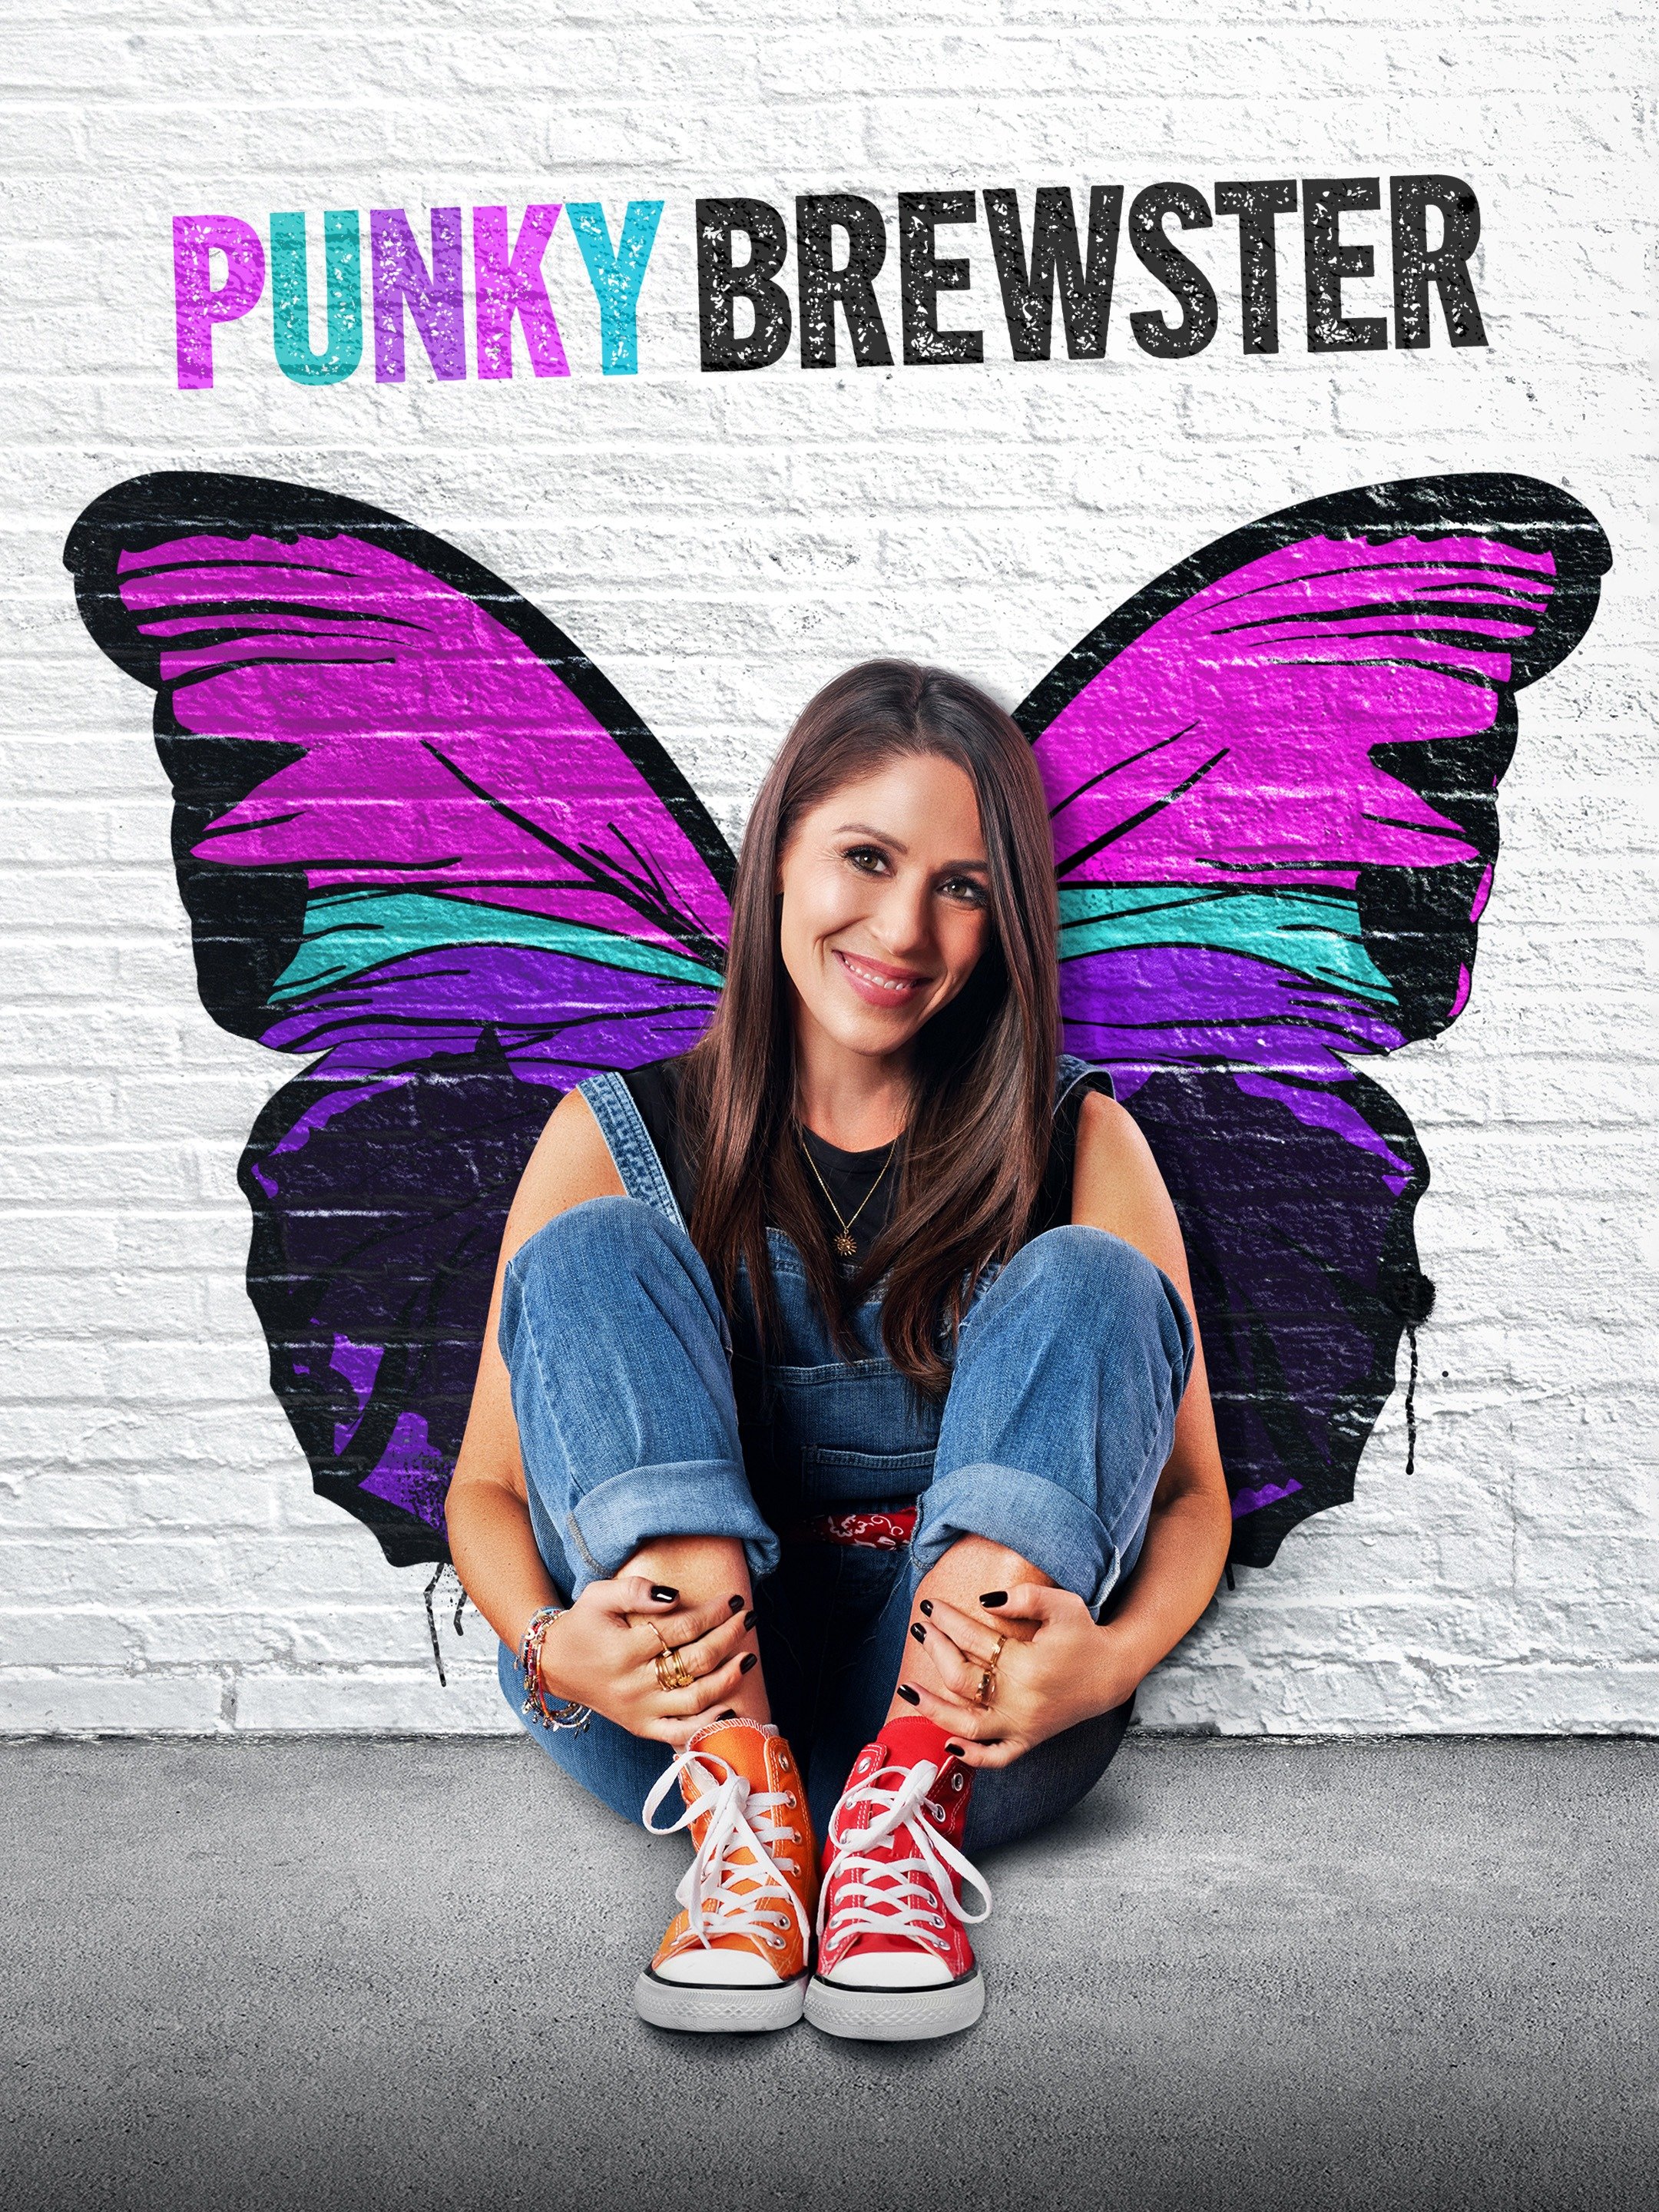 Pictures of punky brewster